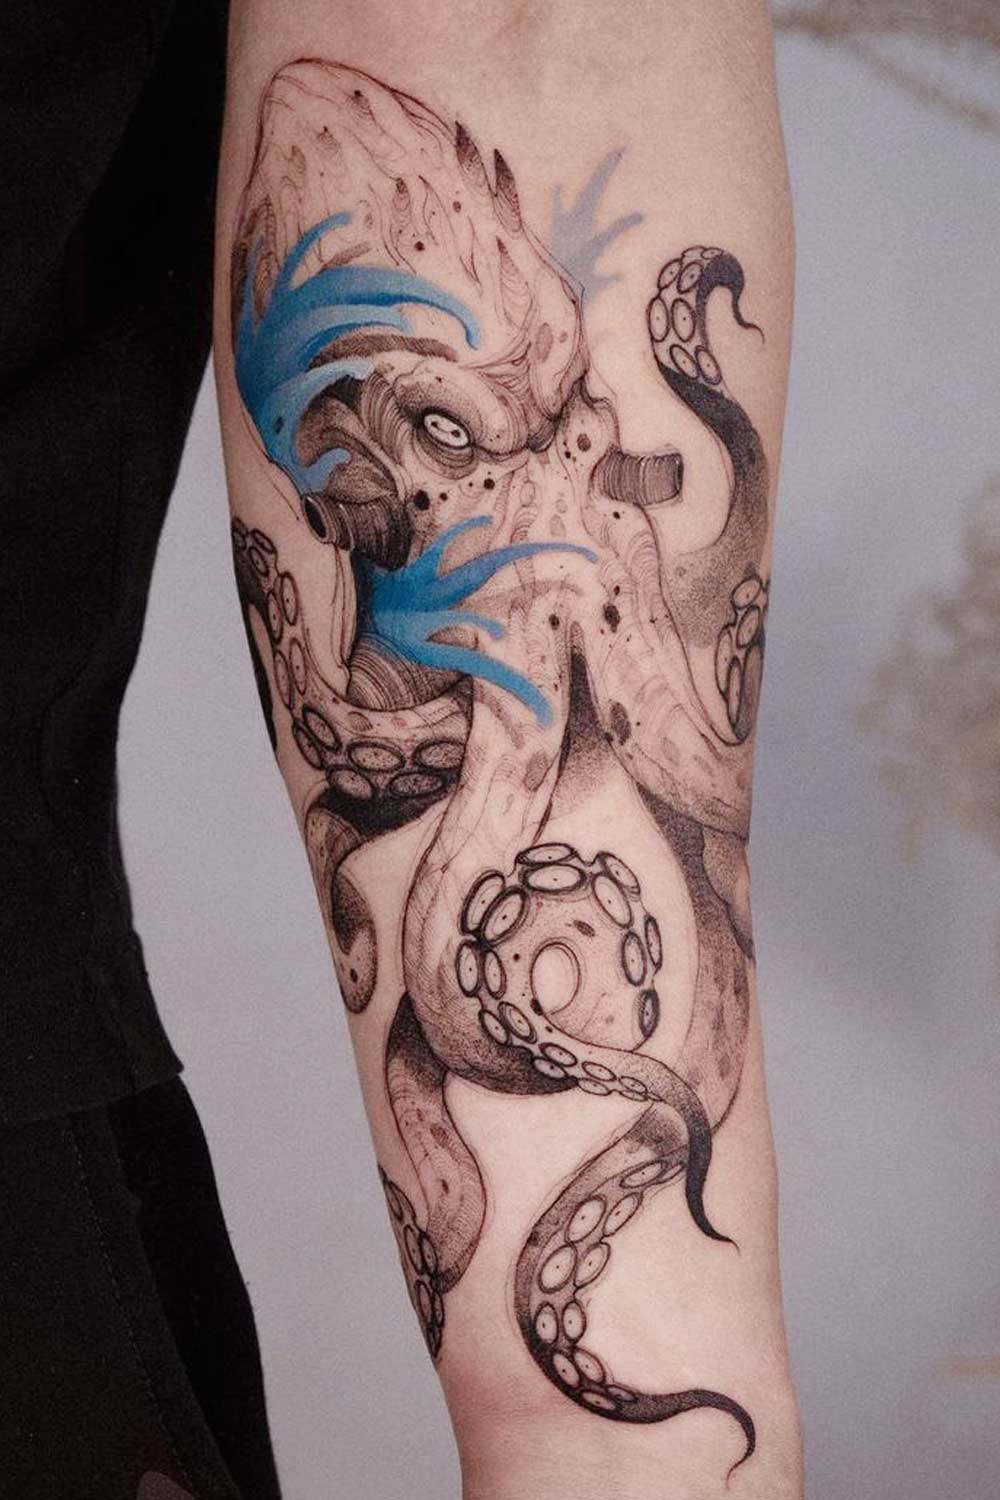 Black and White Octopus Tattoos with Colorful Elements